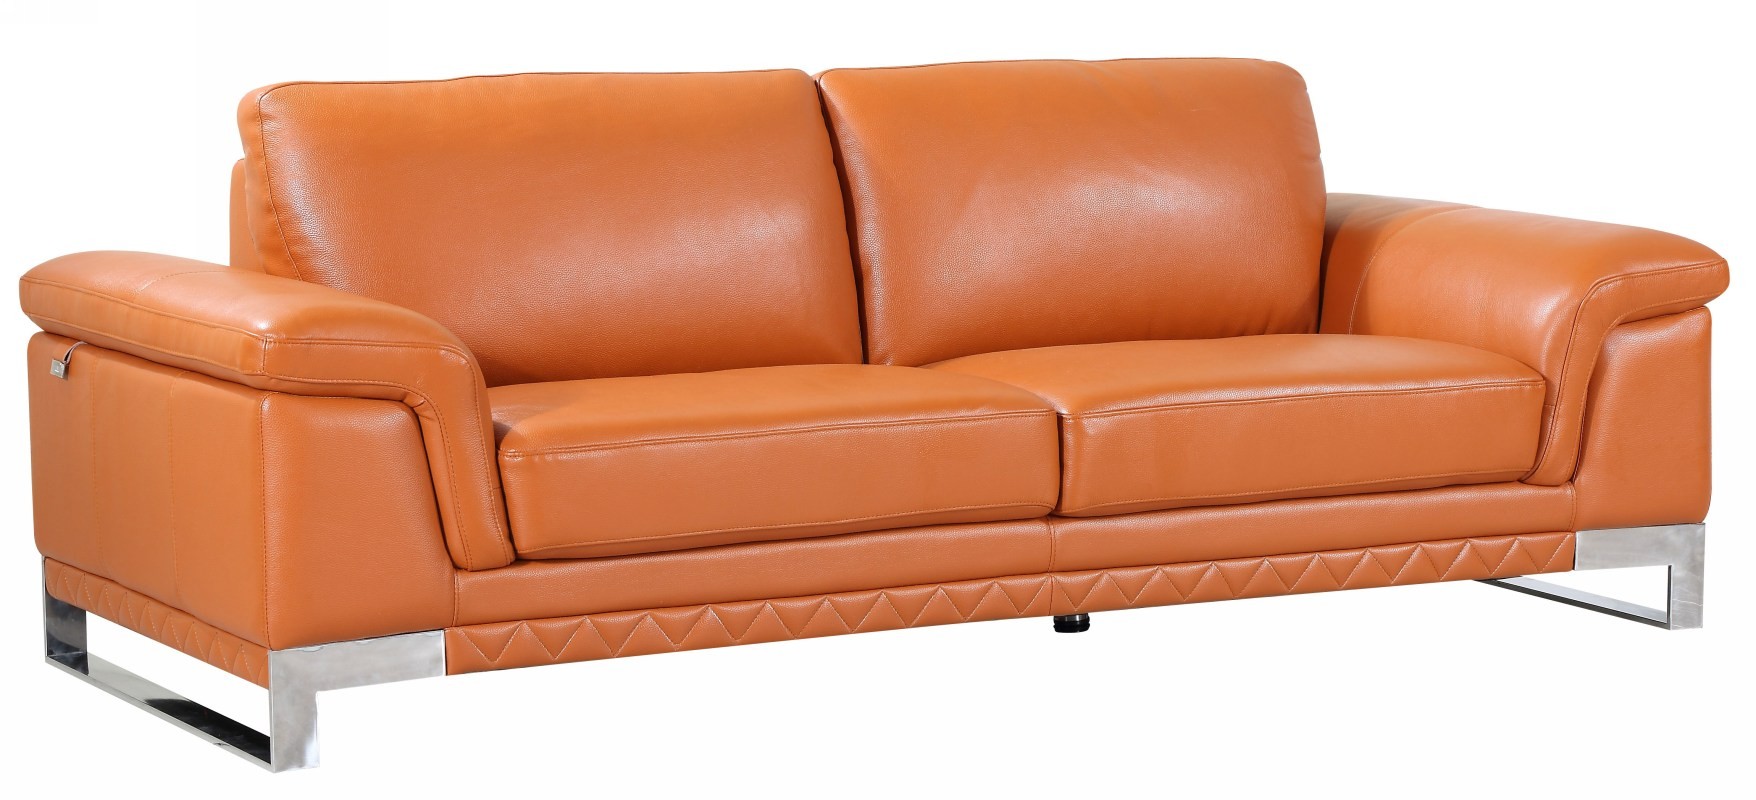 camel leather sofa with blue rug